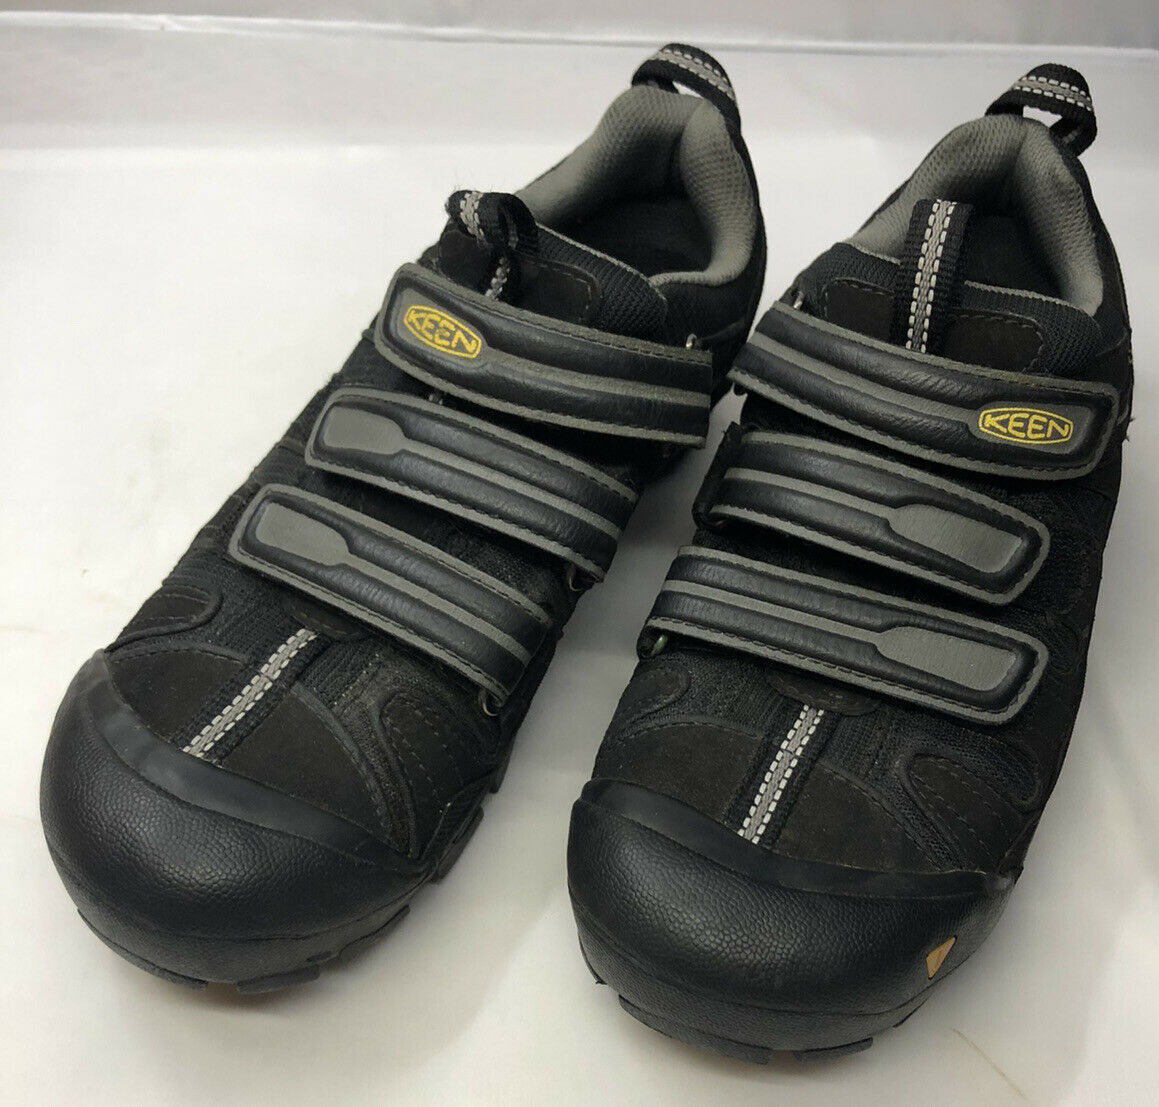 Keen Springwater Bicycle Bike Cycling Athletic Black Shoes Size 8.5